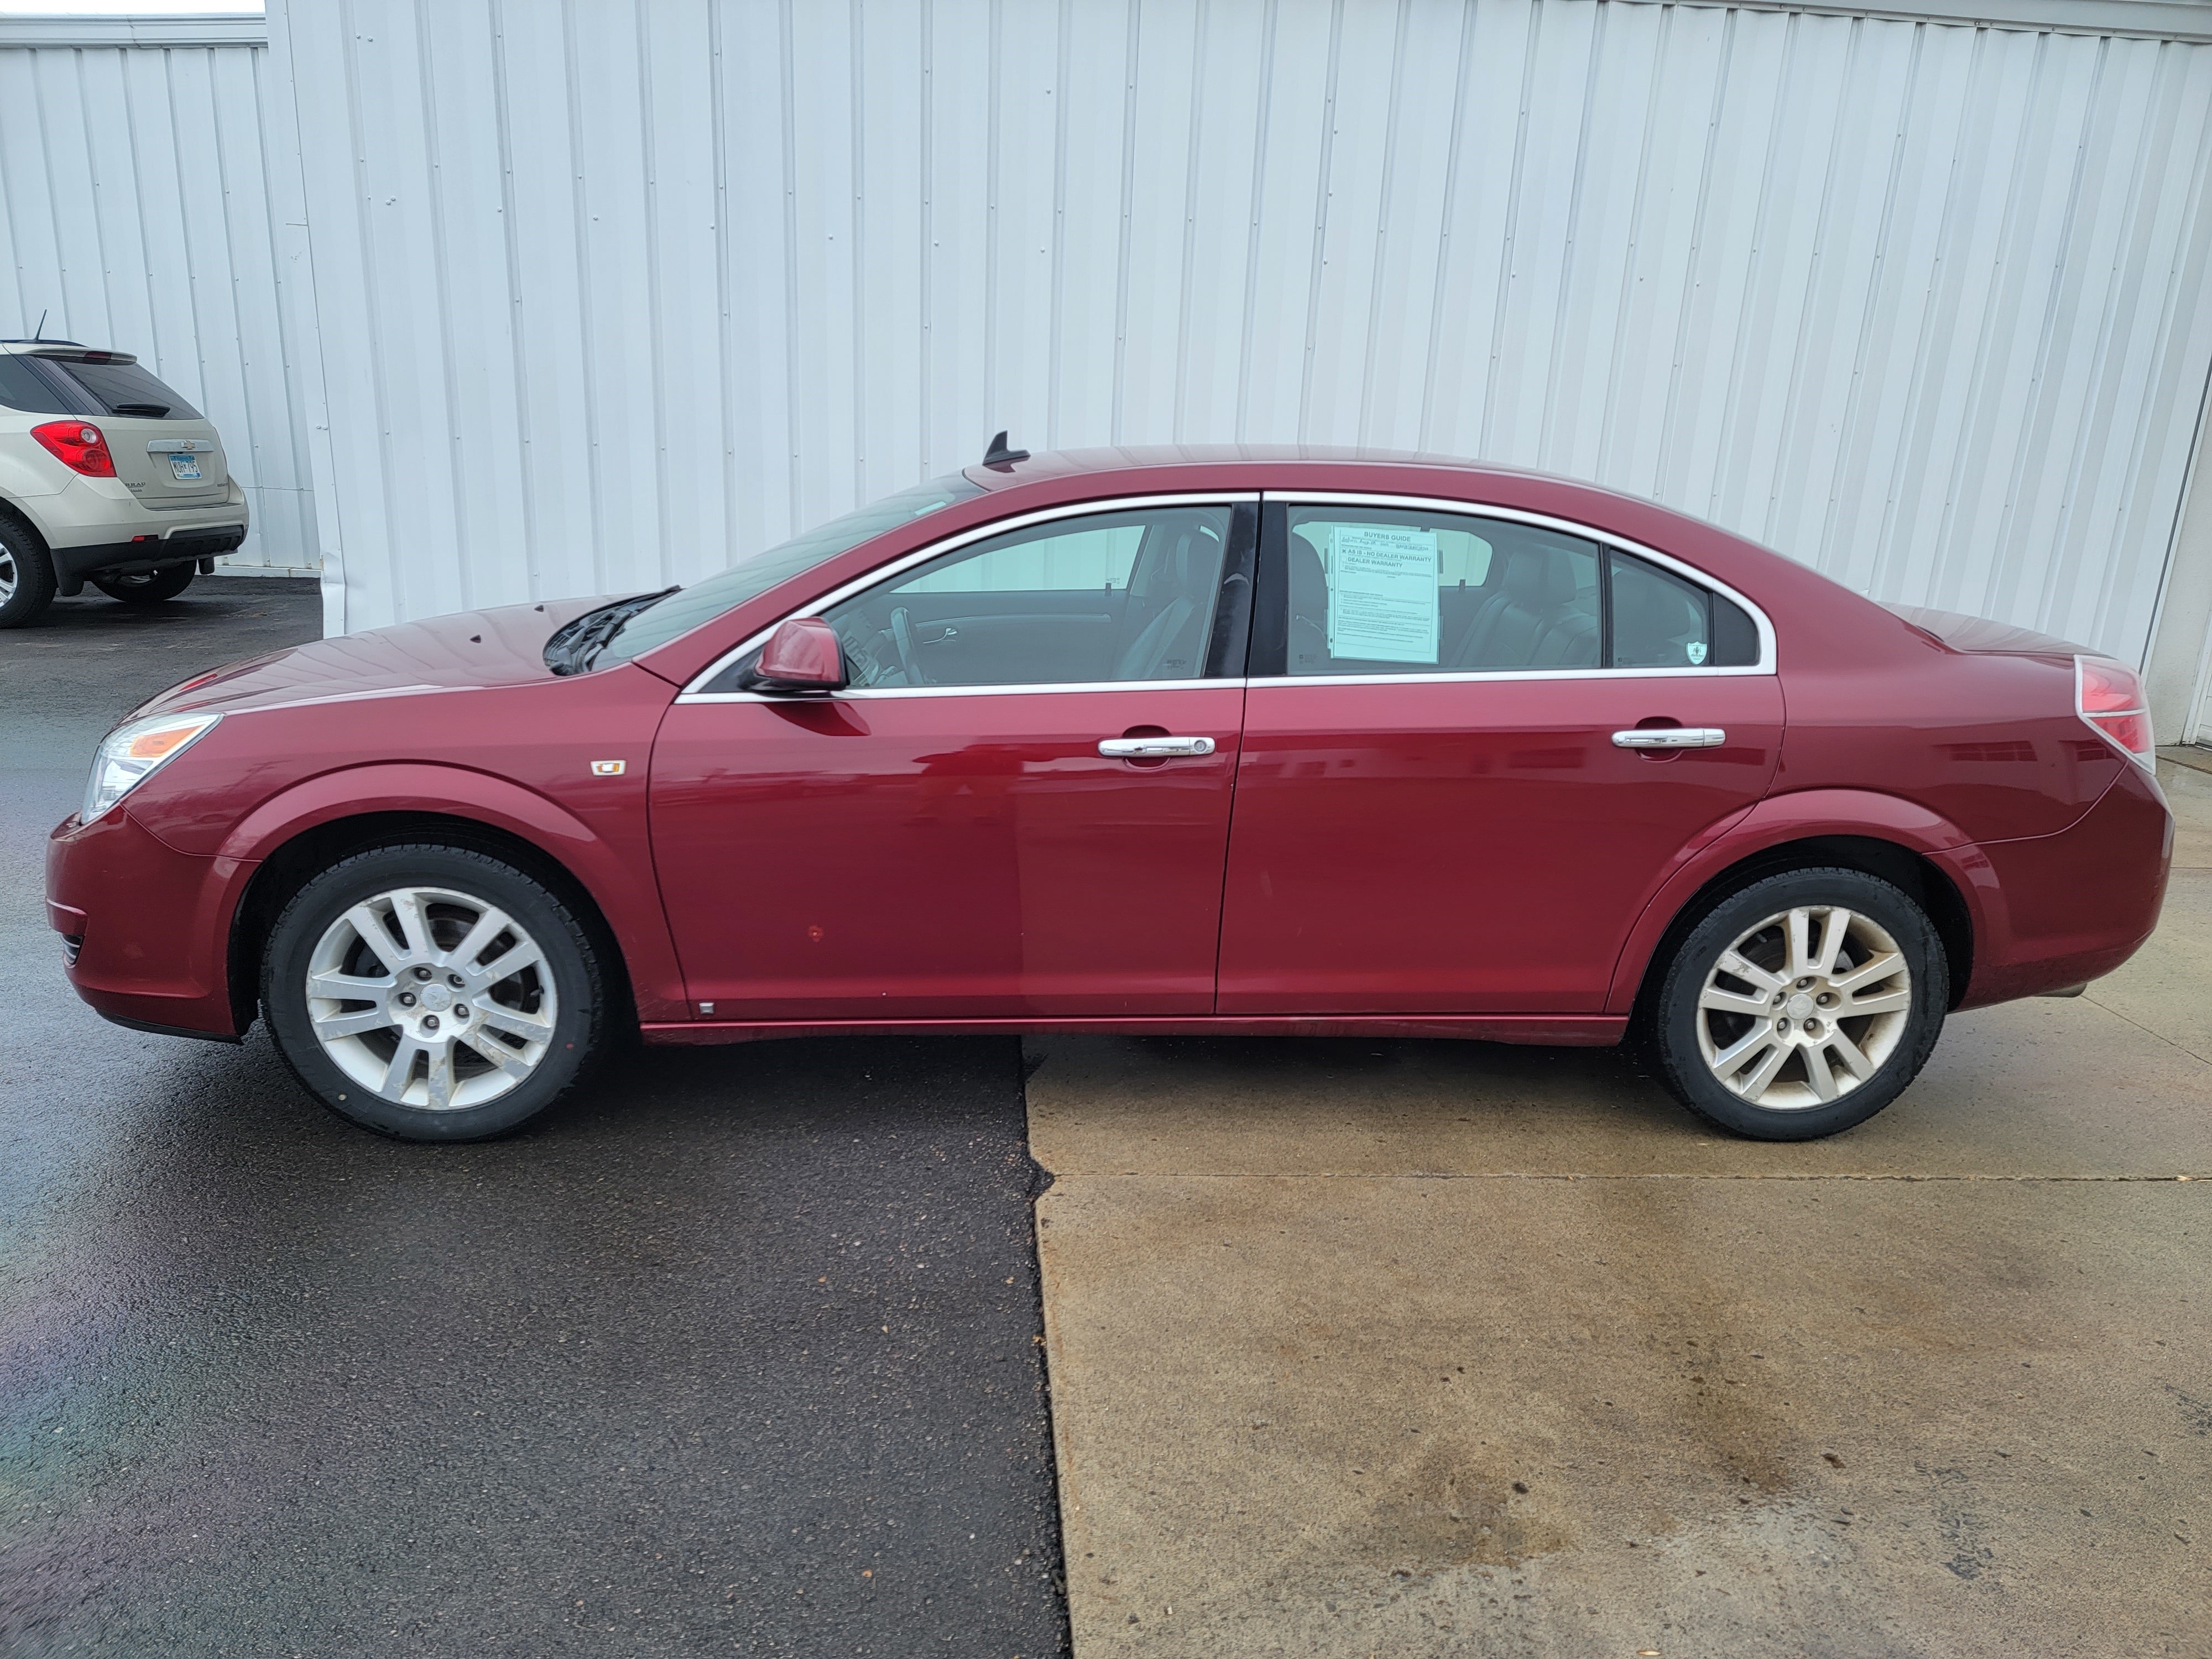 Used 2009 Saturn Aura XR with VIN 1G8ZV57B39F114723 for sale in Arlington, Minnesota